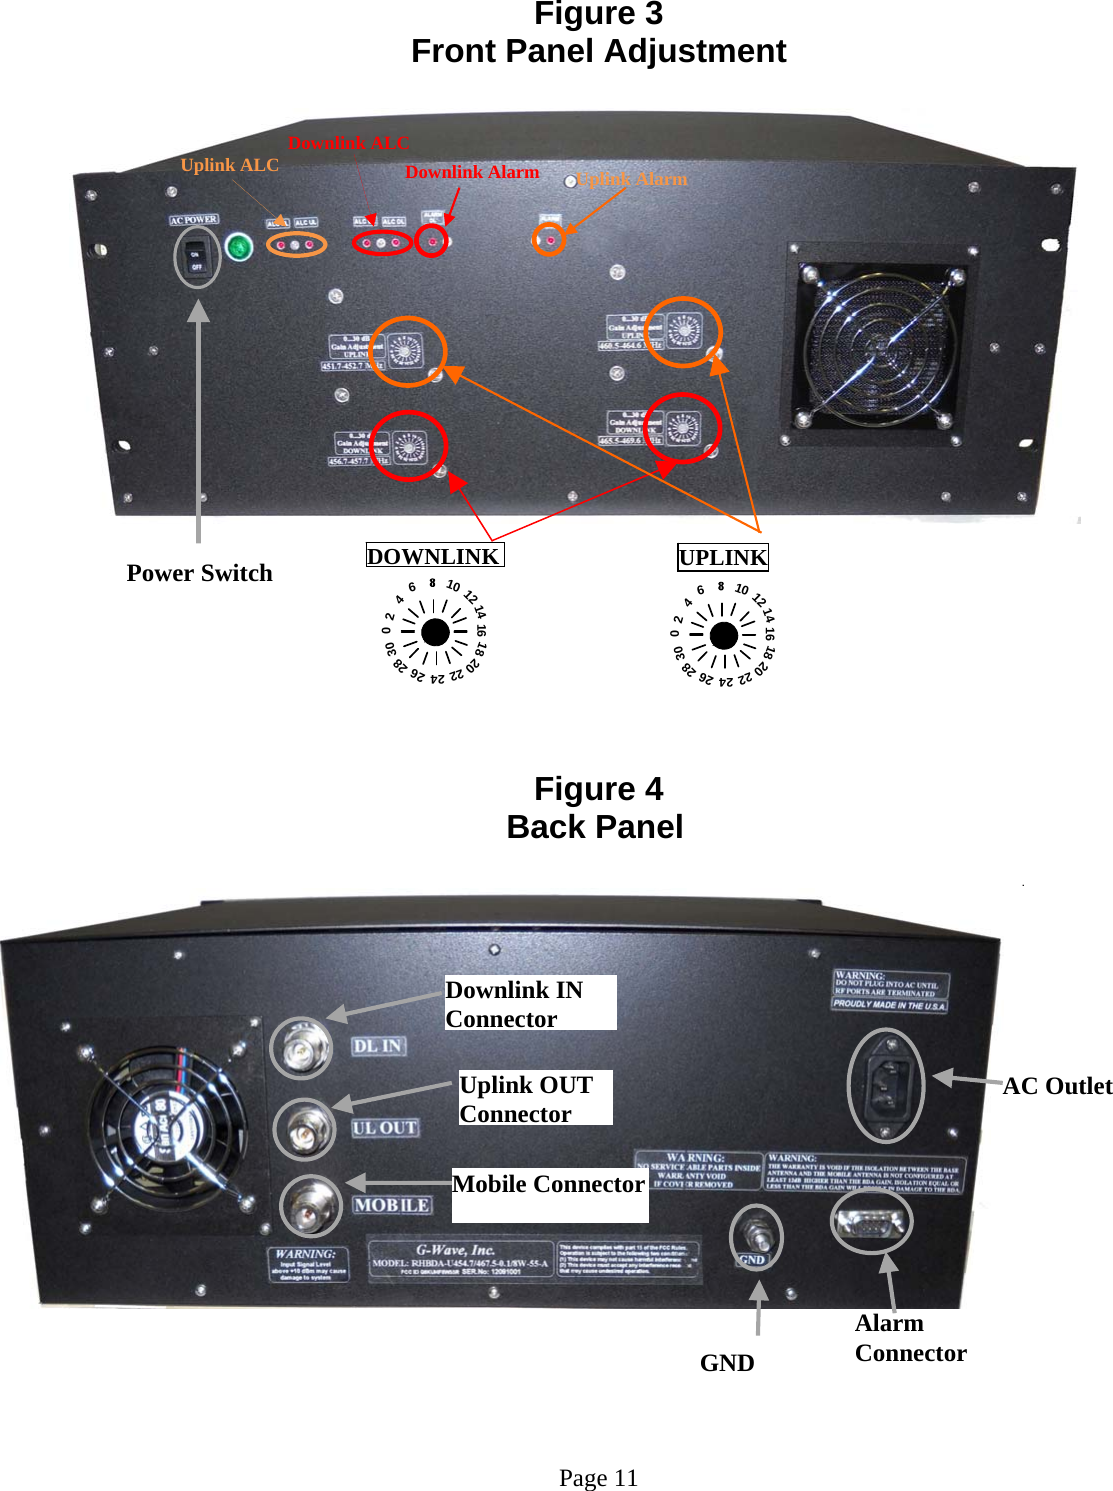 Figure 3 Front Panel Adjustment  Downlink ALC Uplink ALC  Power Switch                                                      Figure 4 Back Panel                                                                                  .                     Page 11 AC Outlet Uplink AlarmDownlink AlarmUPLINKDOWNLINK0301664212101418202224262030166421210141820222426288Downlink IN ConnectorMobile ConnectorUplink OUT ConnectorGND Alarm Connector 